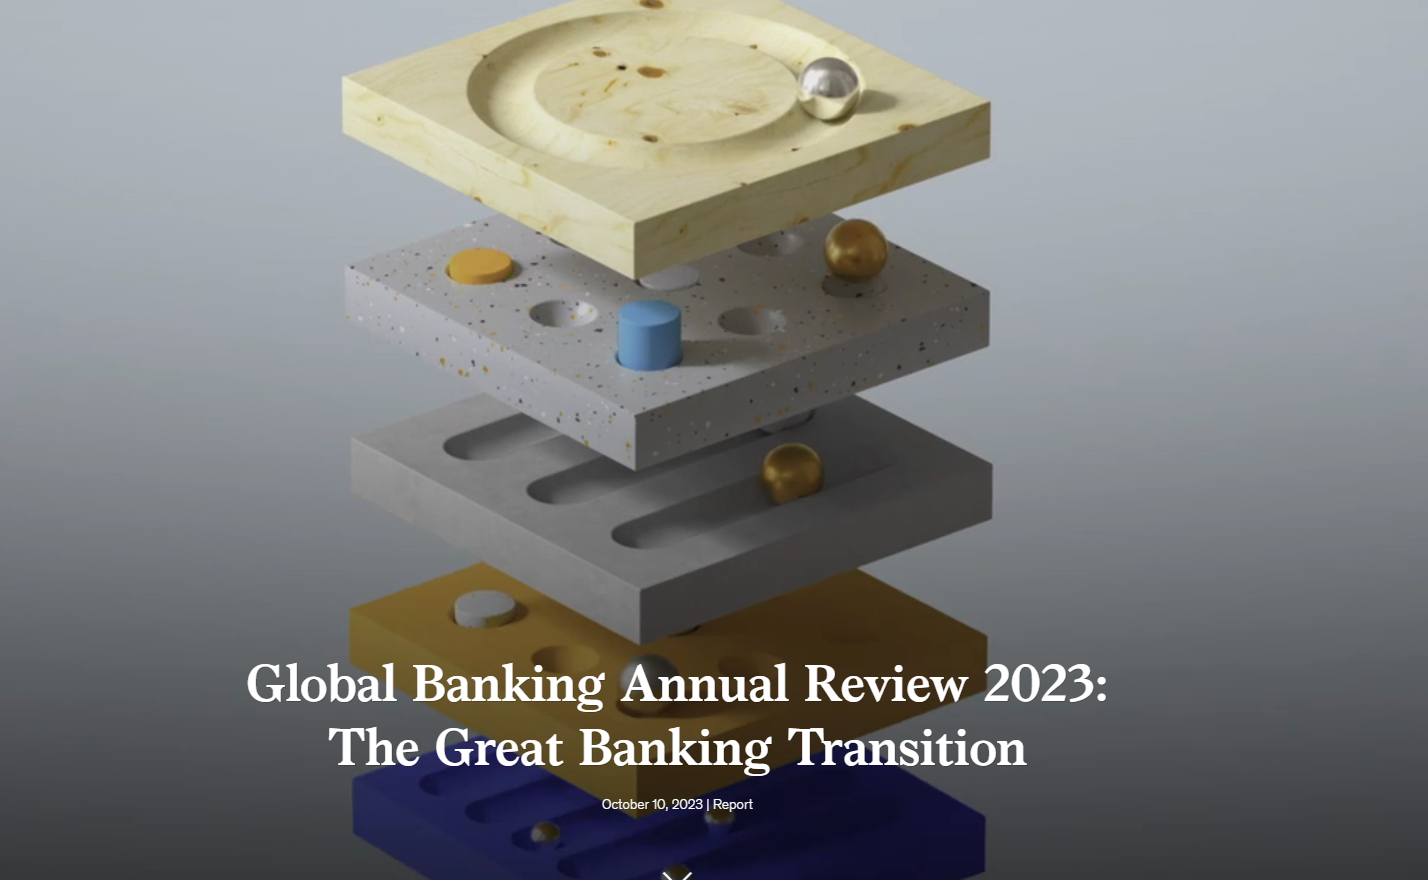 Global Banking Annual Review 2023: The Great Banking Transition